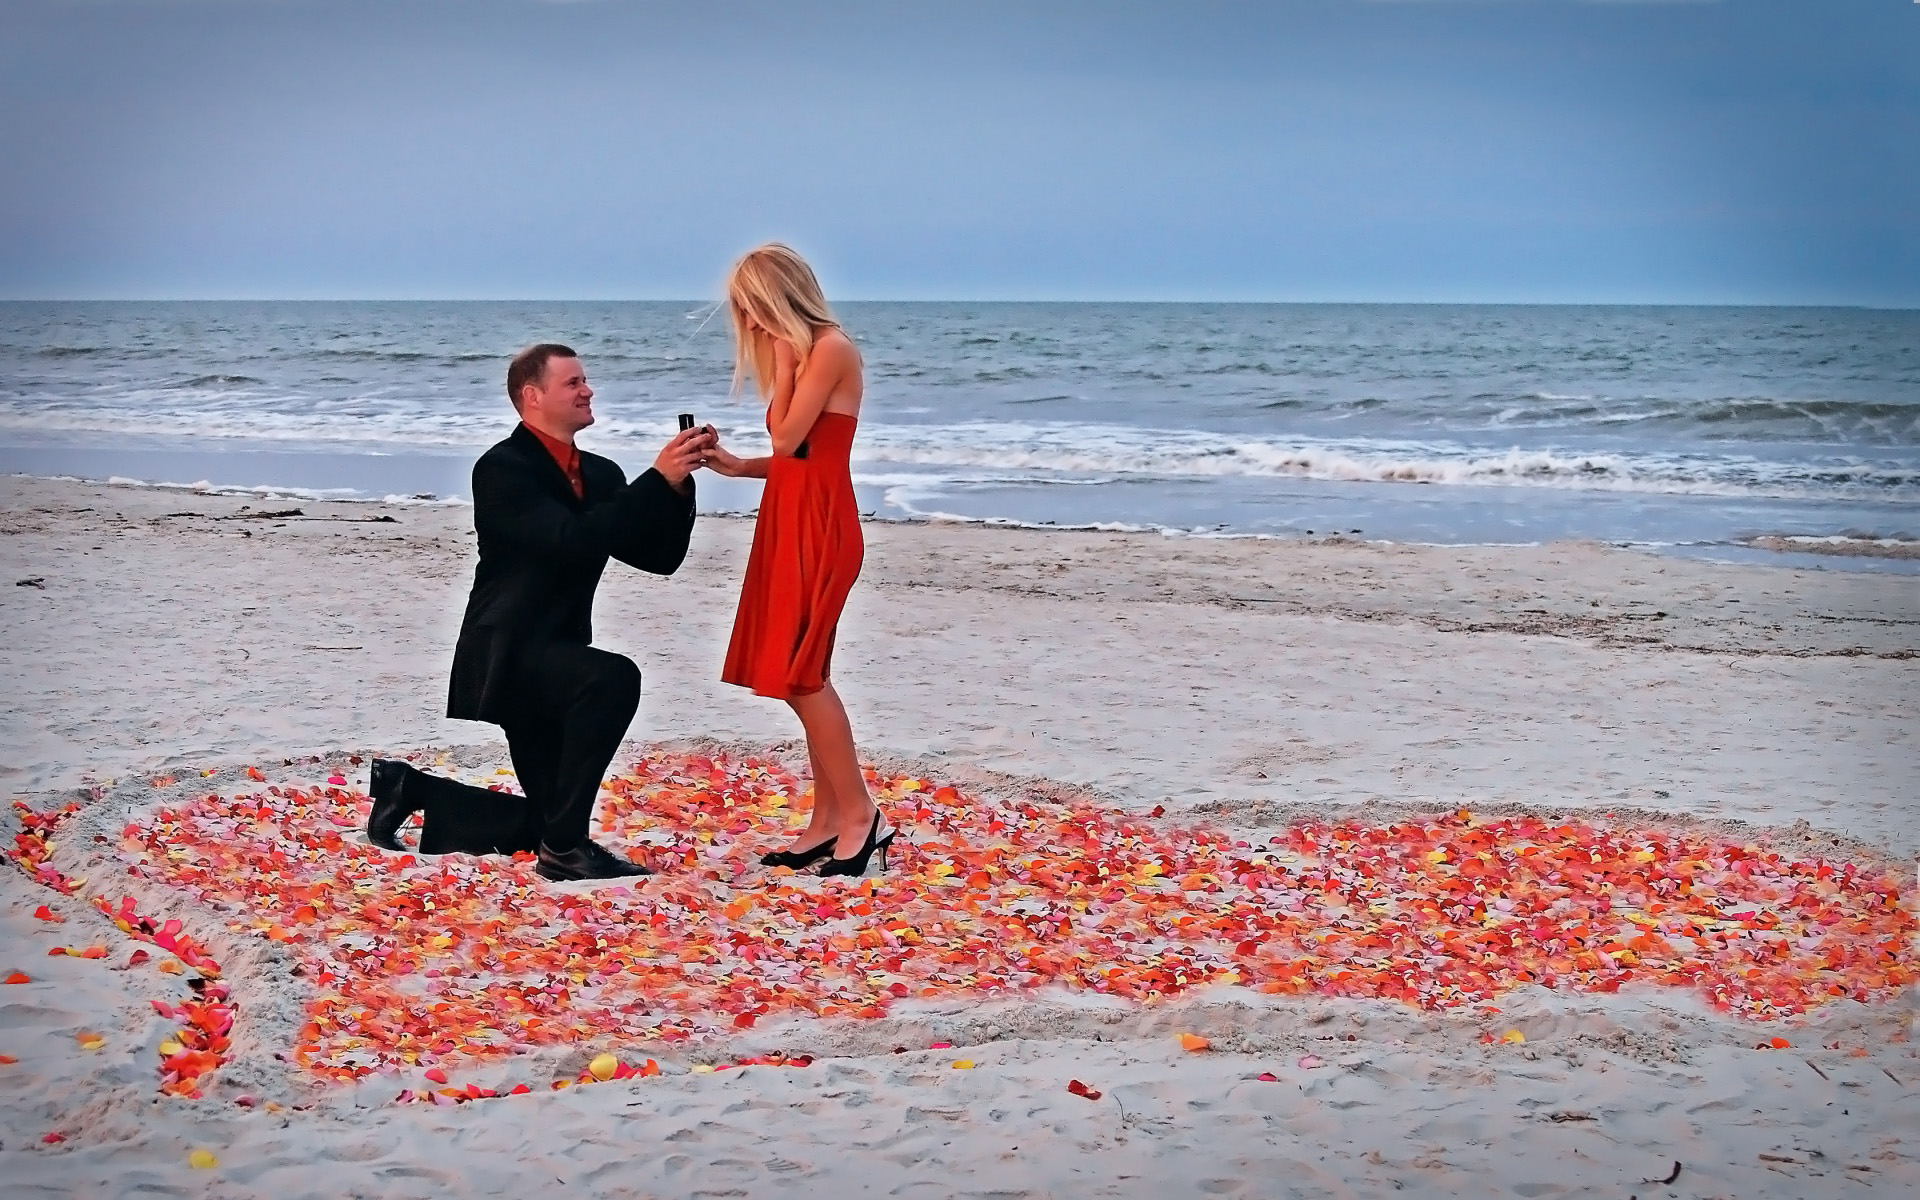 happy propose day 2016 images 